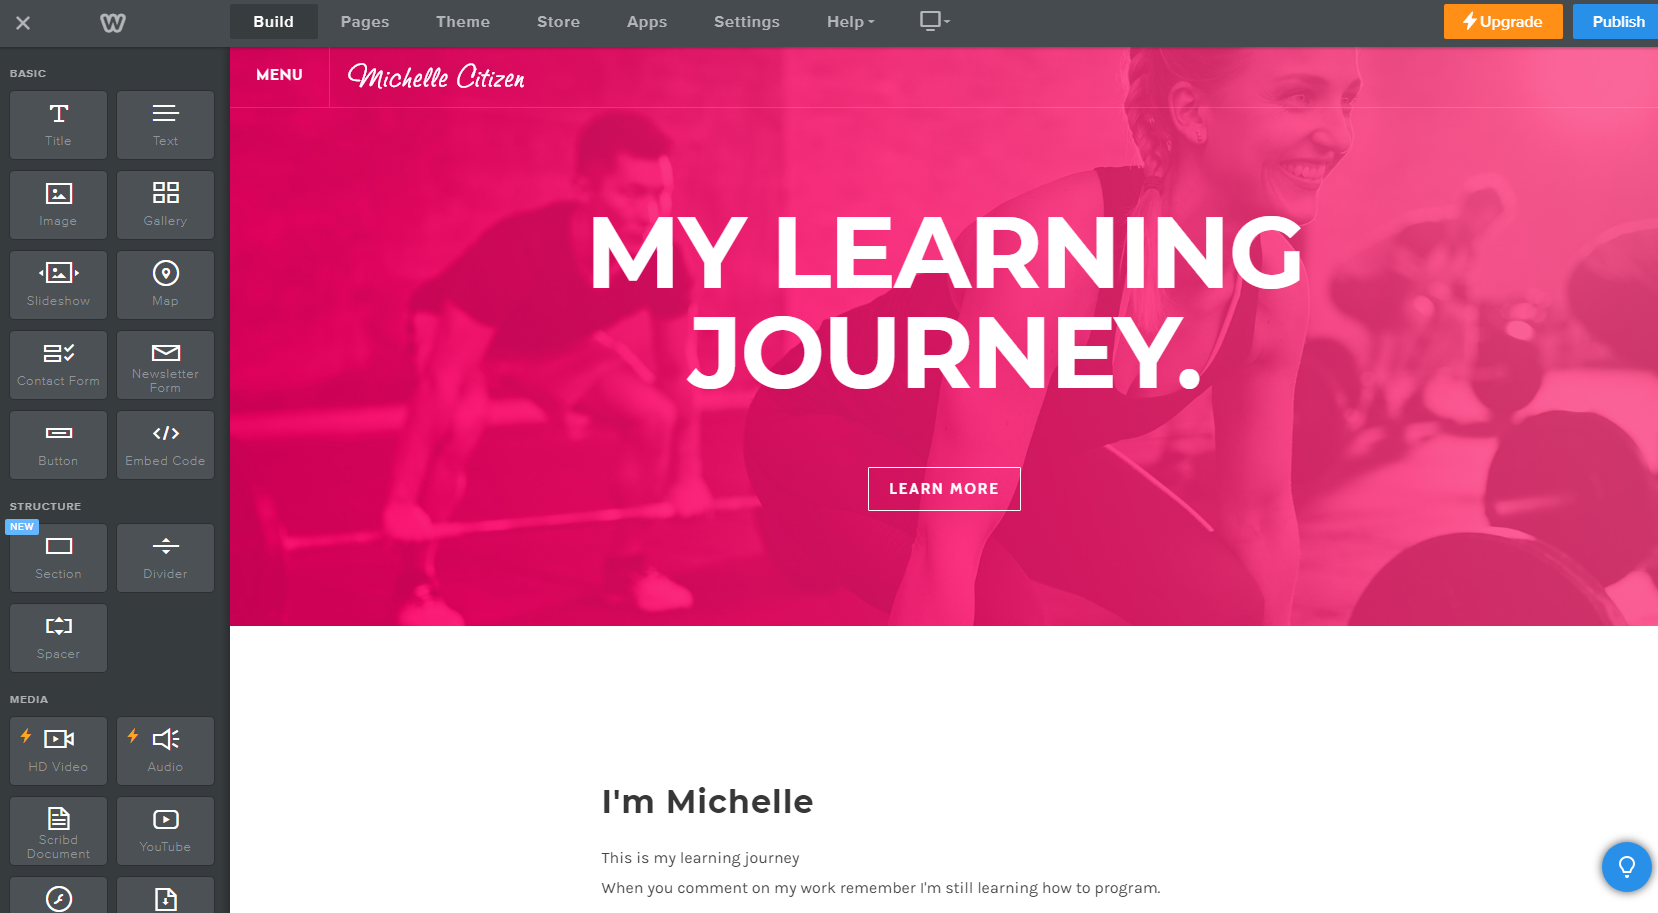 Screenshot of My learning journey off Weebly website